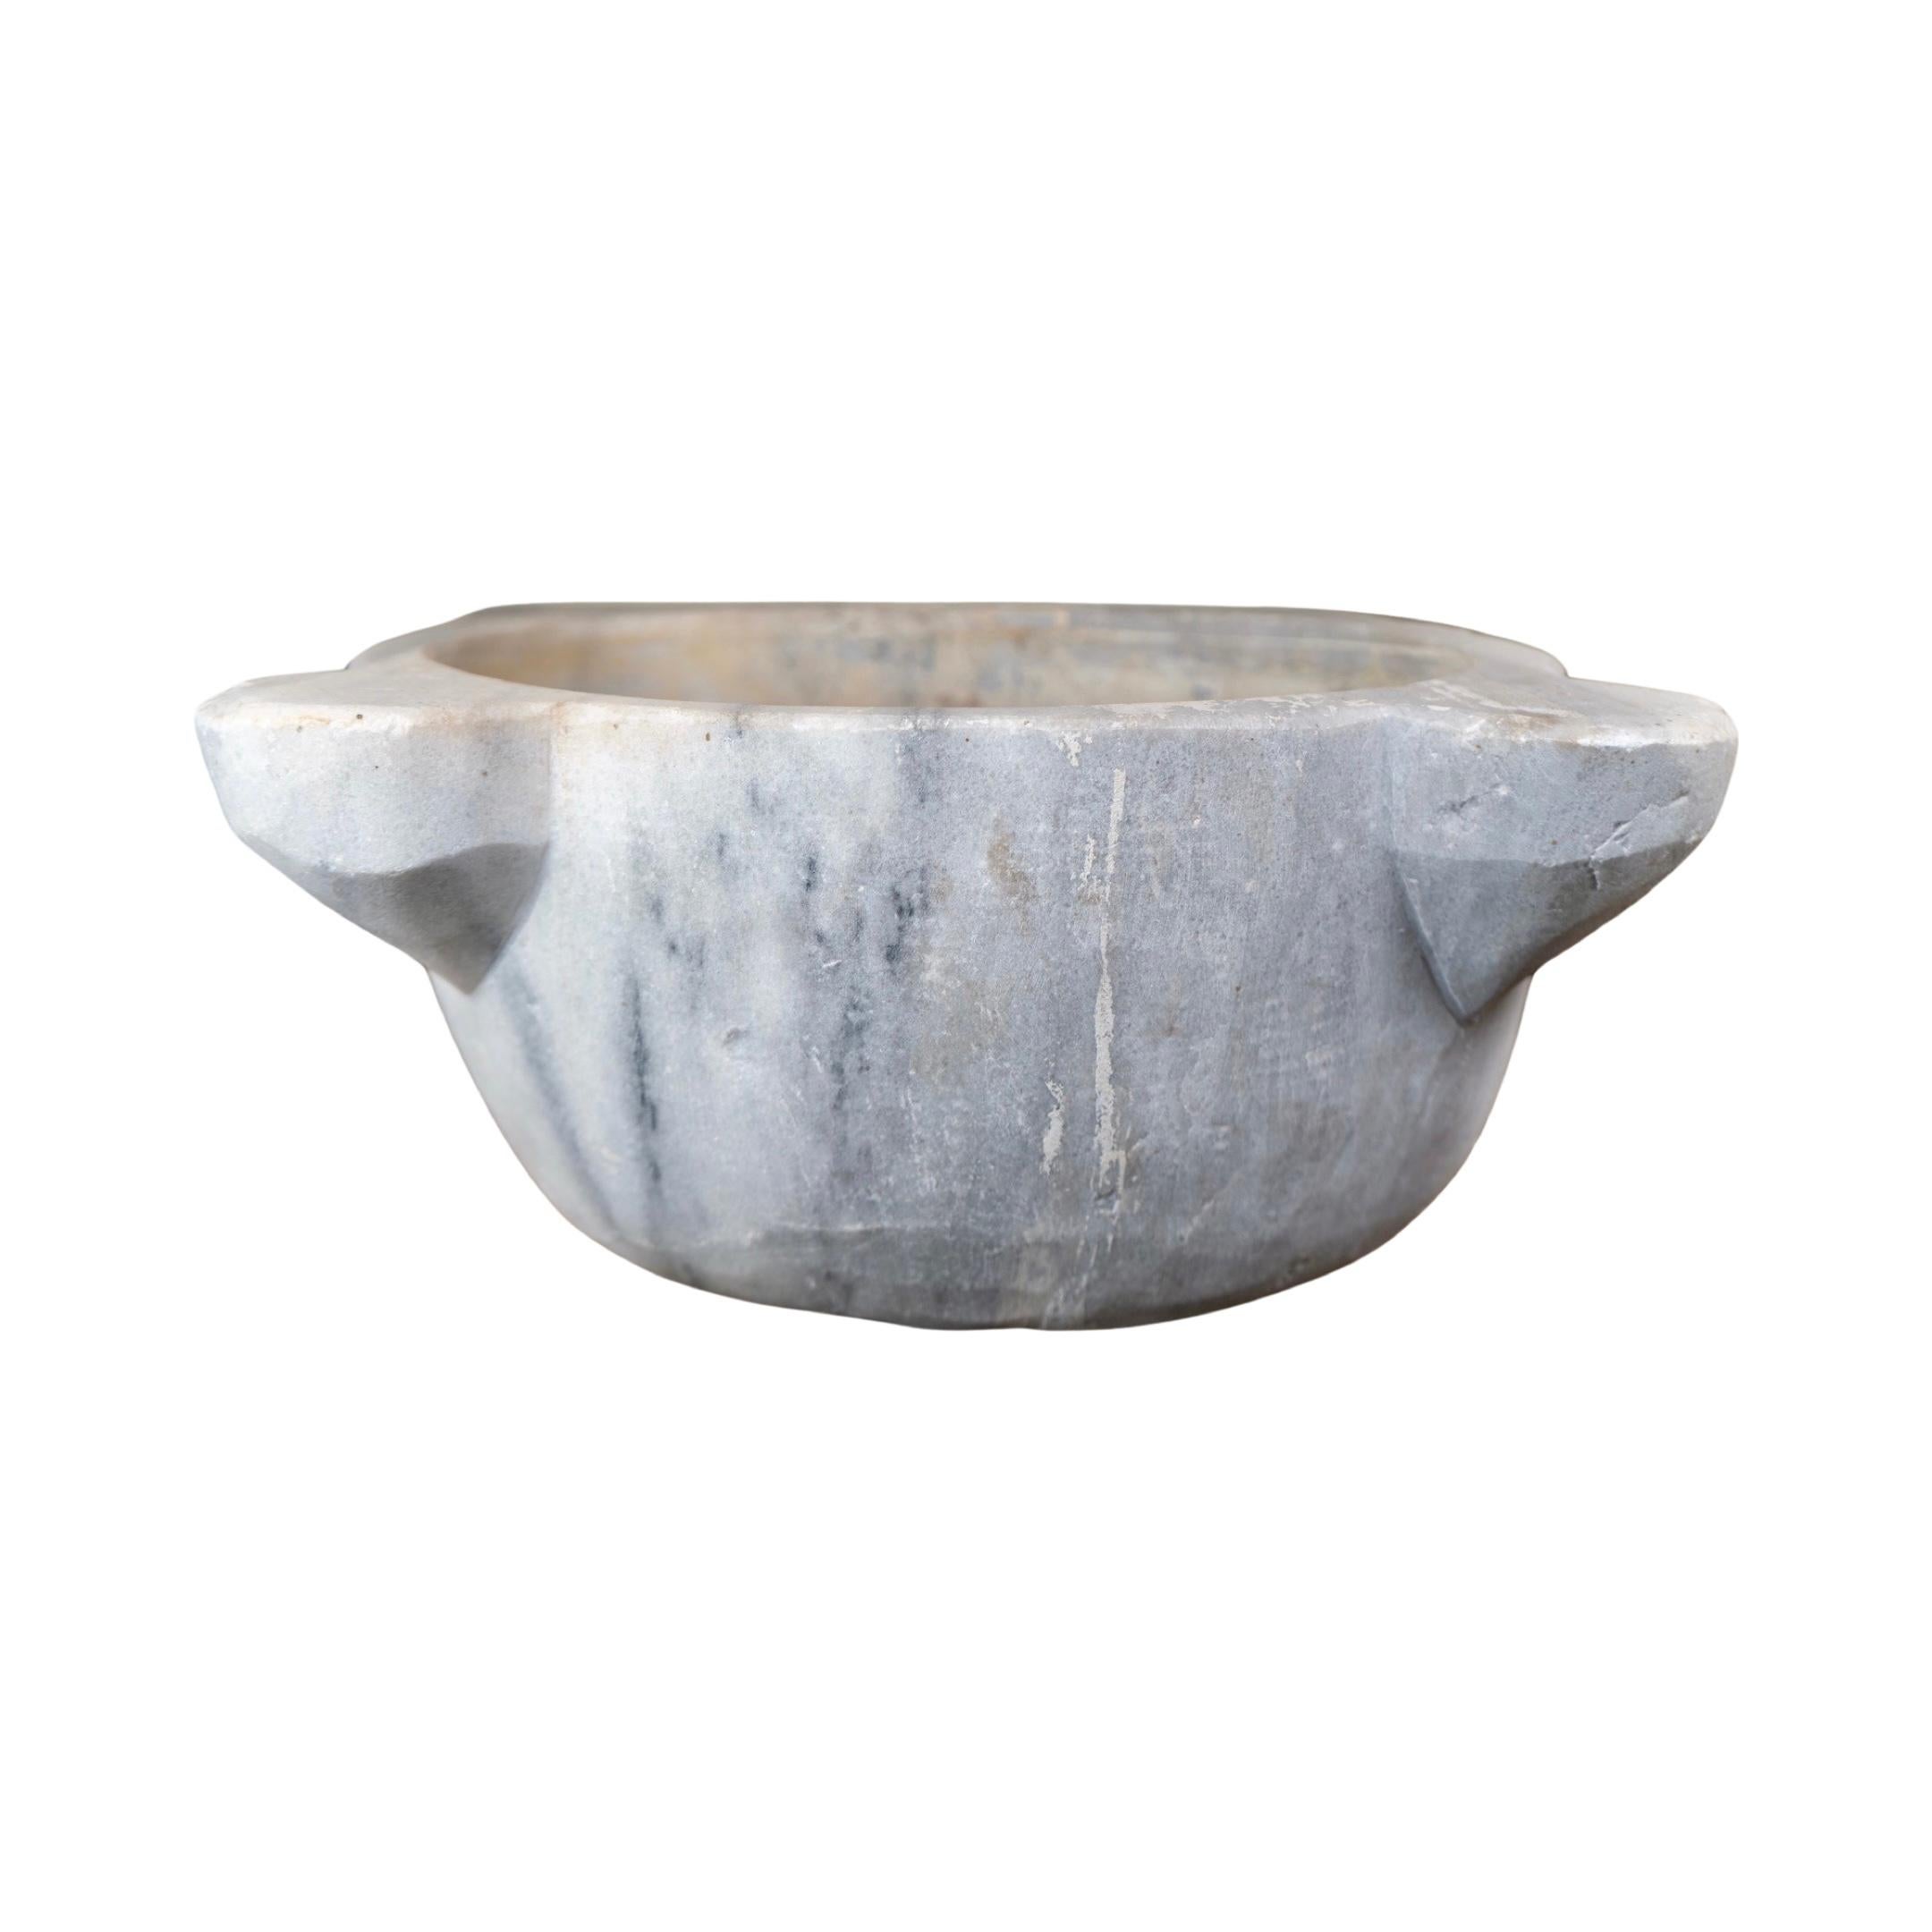 This gorgeous sink dates back to the 1880s. Item features gray tent throughout. Origin; Greece